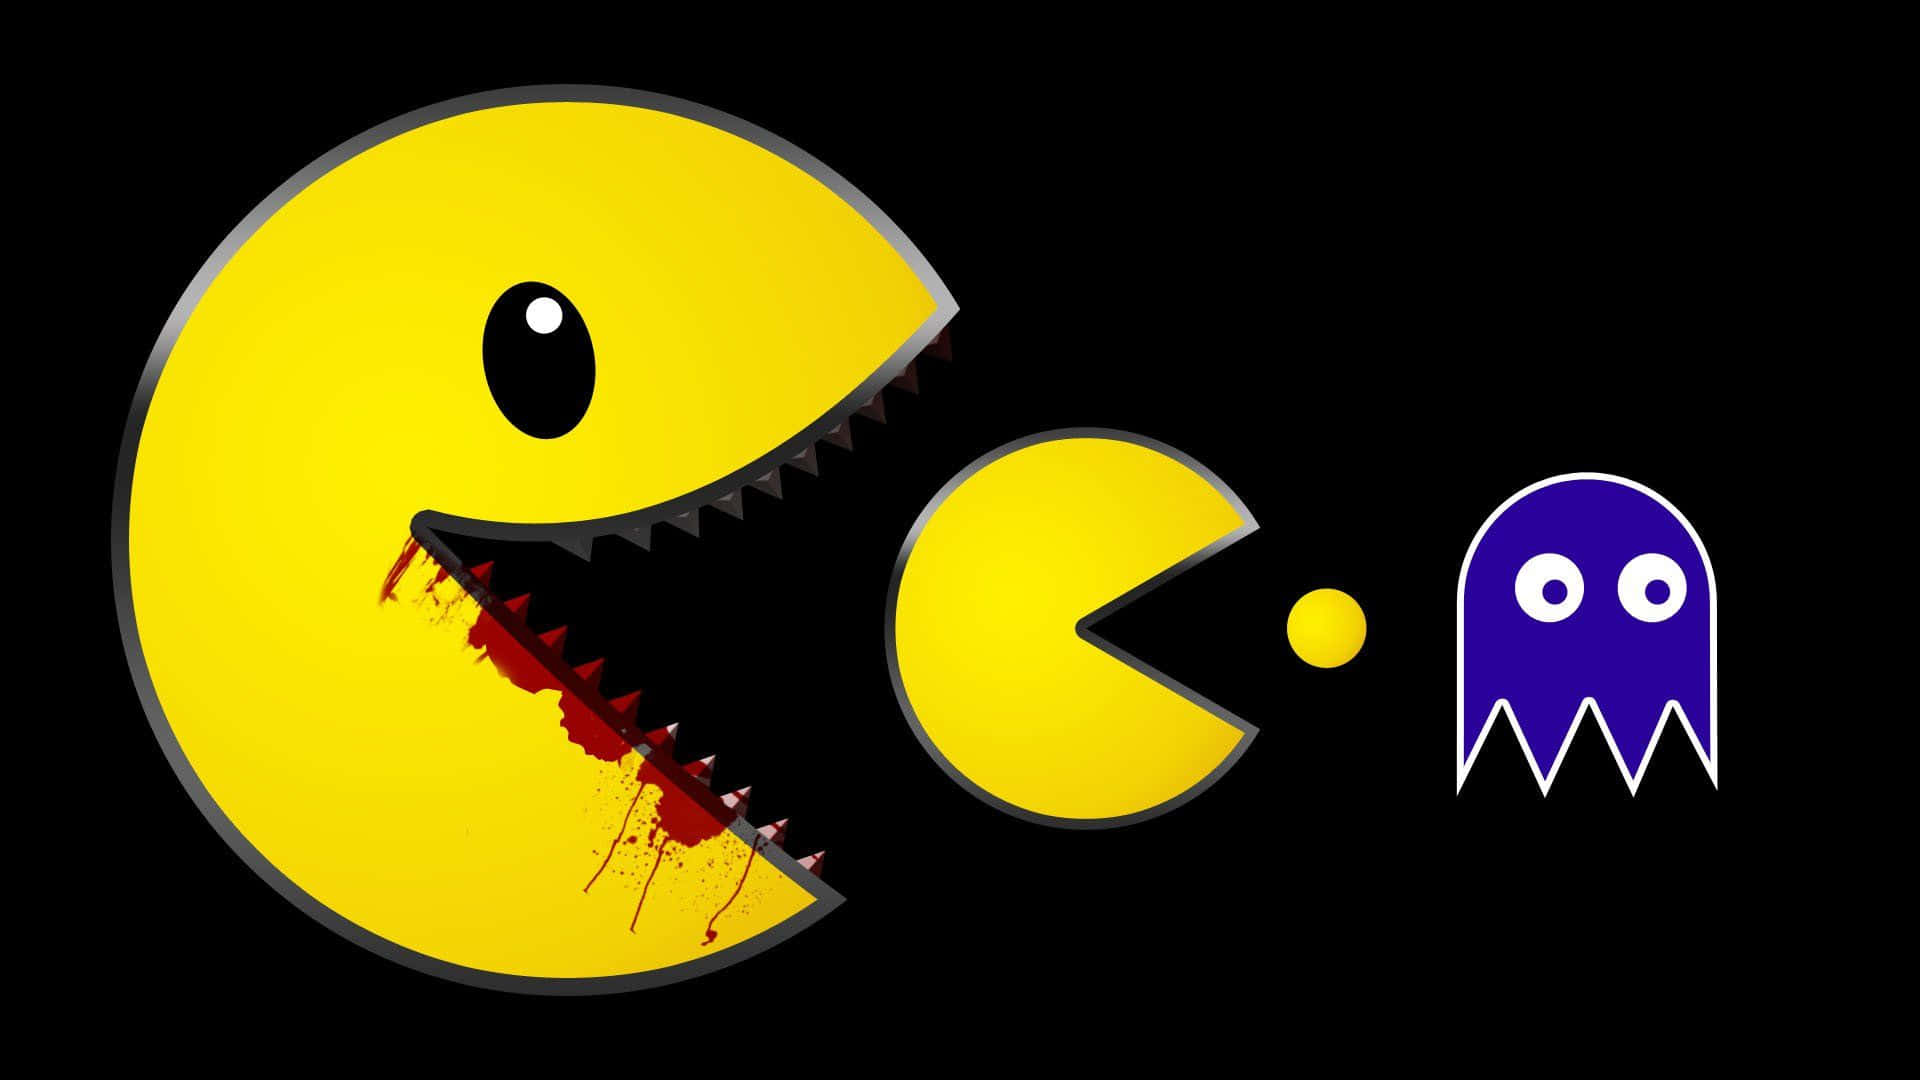 Enjoy the classic arcade game of Pacman in HD Wallpaper